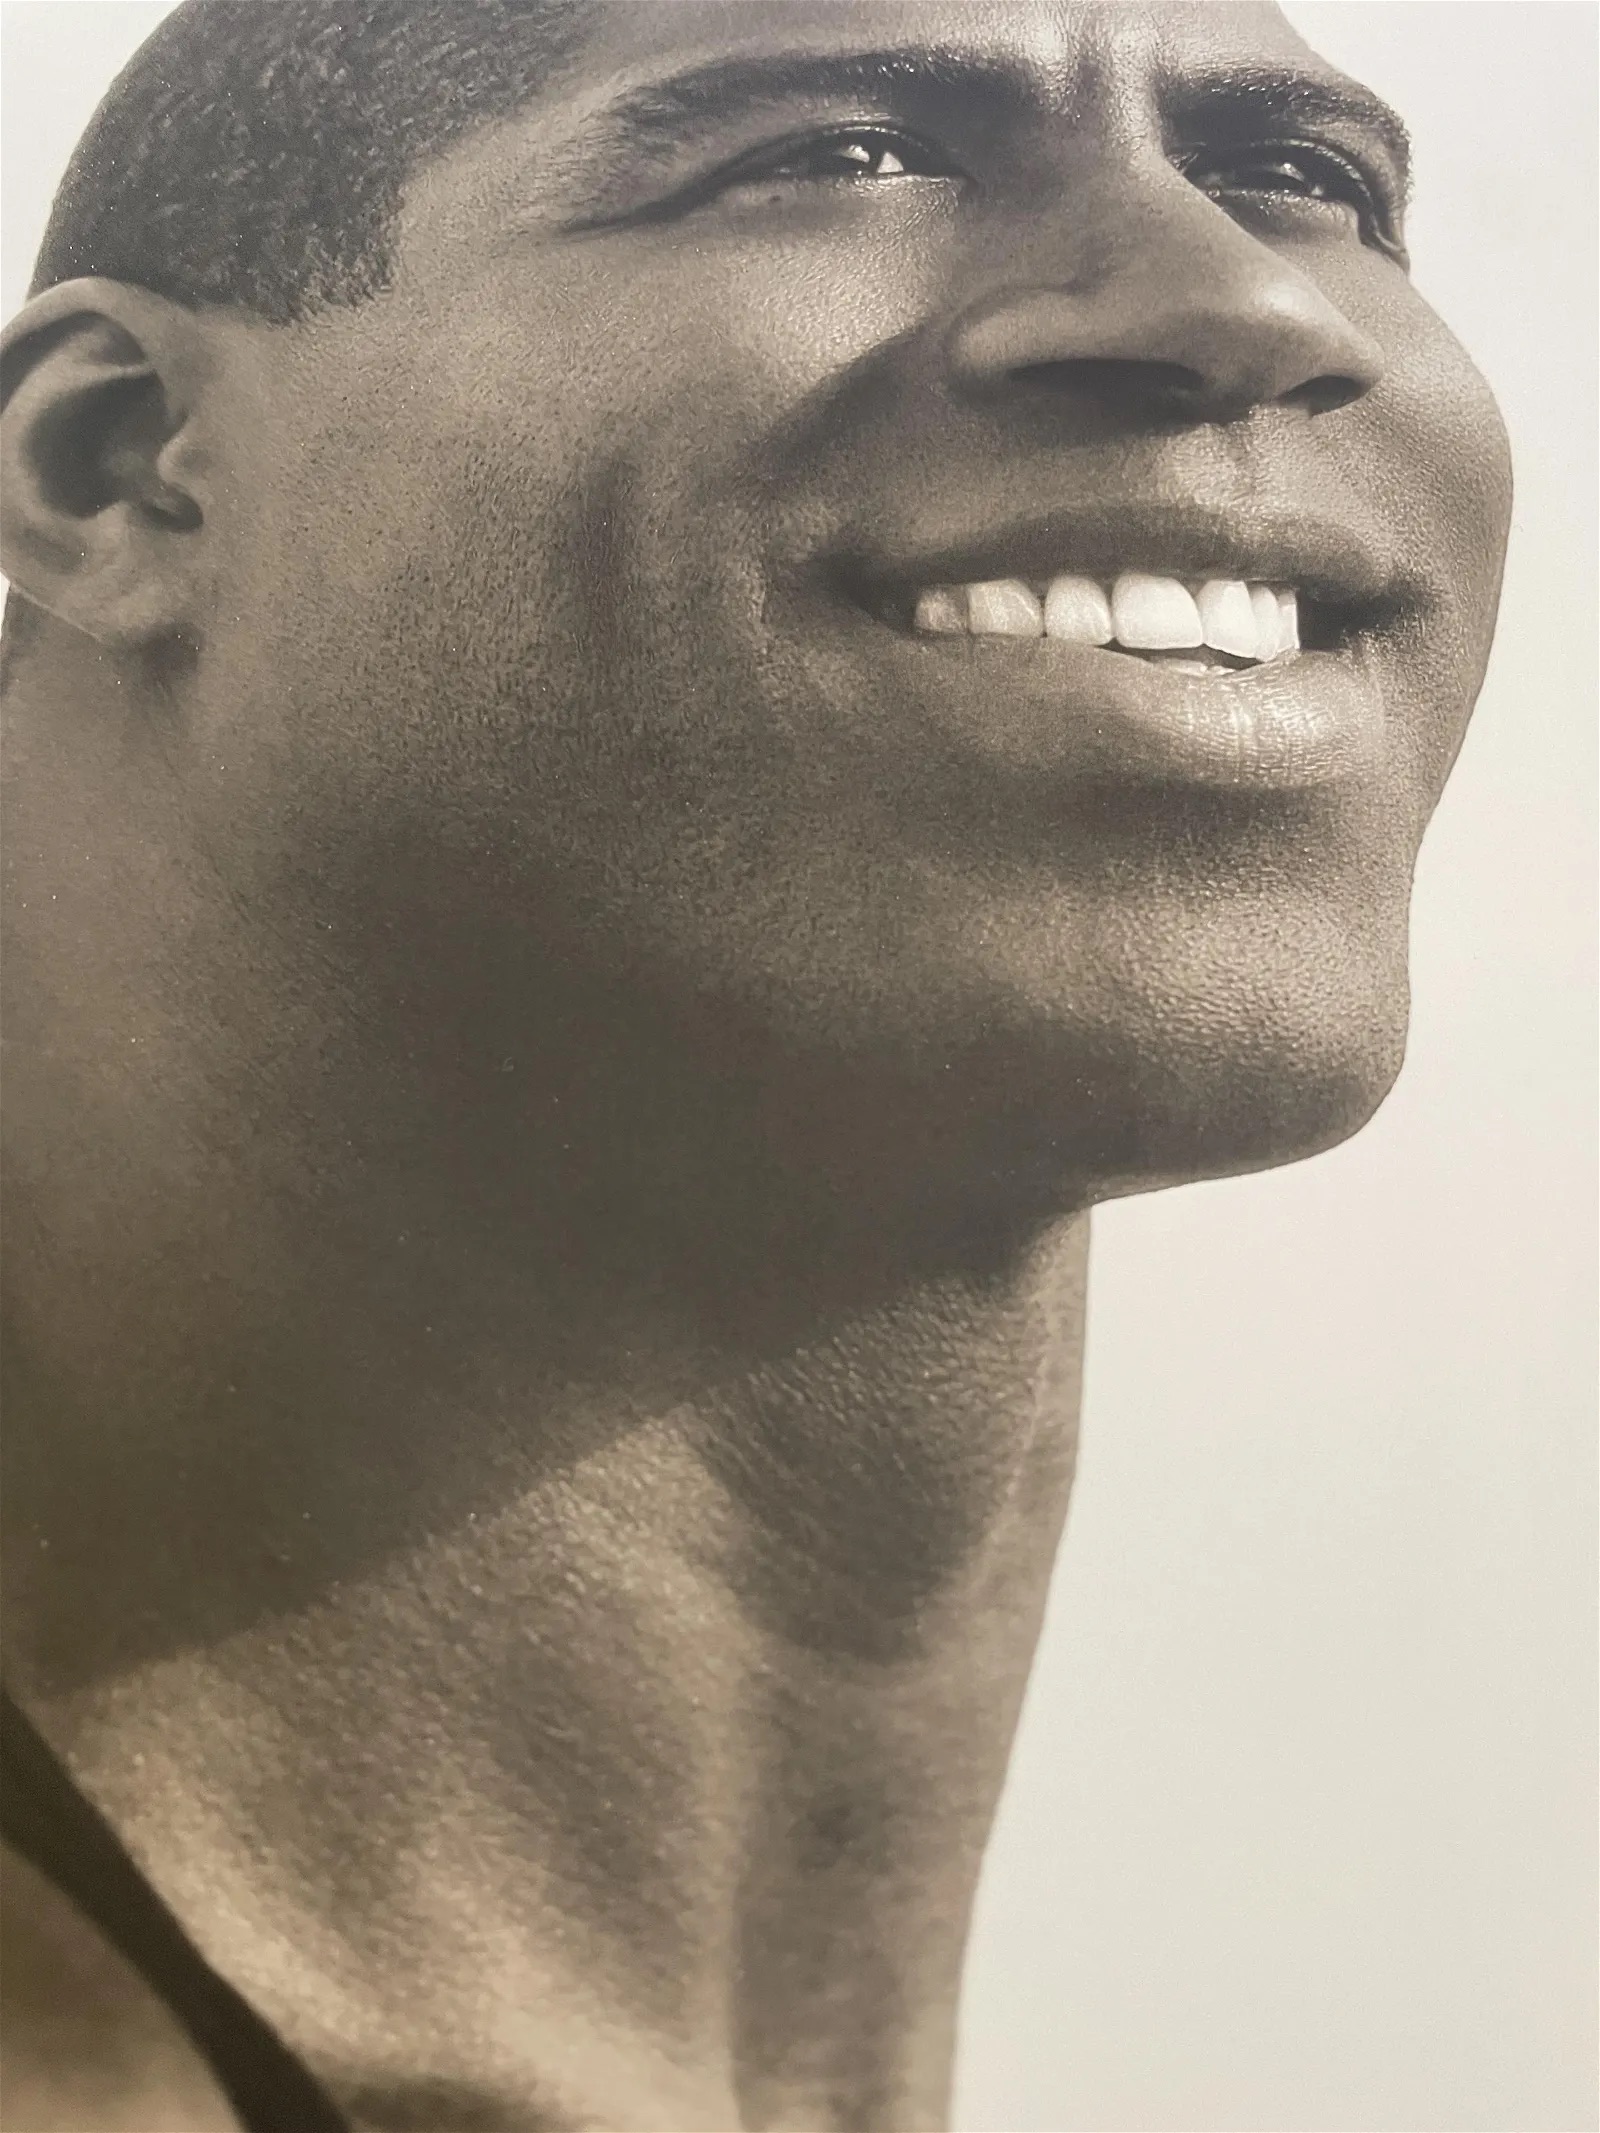 Herb Ritts "Earvin Magic Johnson, Hollywood, 1992" Print - Image 6 of 6